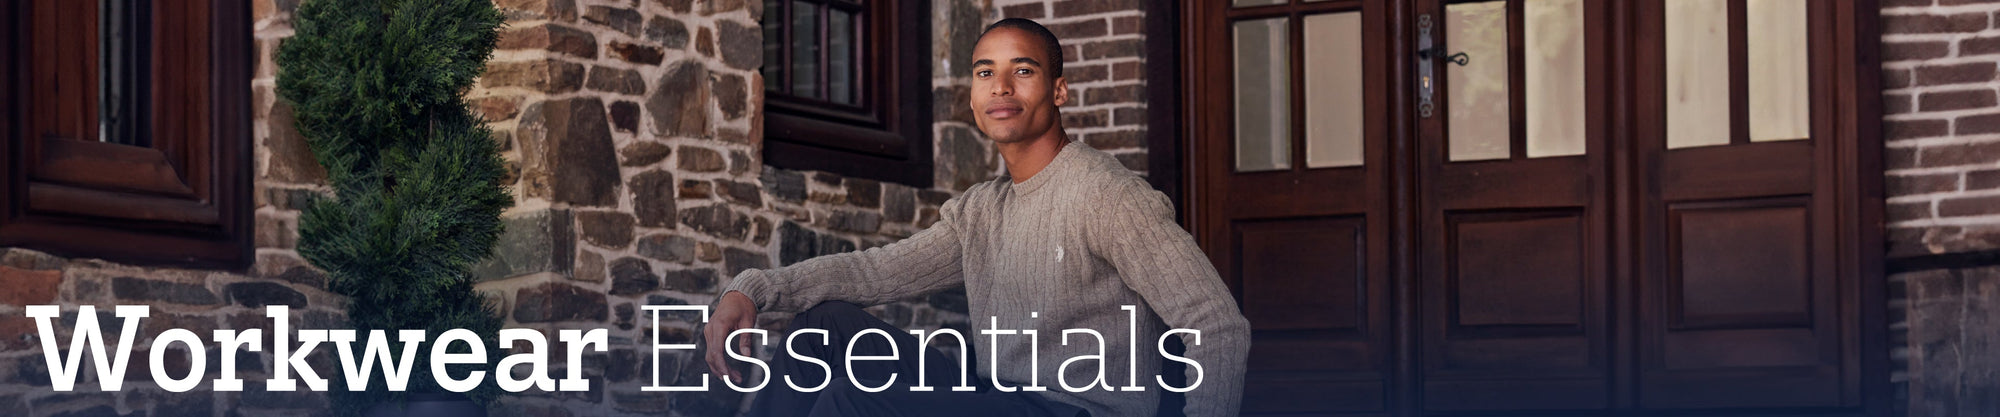  Discover a wide range of smart casual and workwear essentials. Find new clothing inspiration perfect for layering 